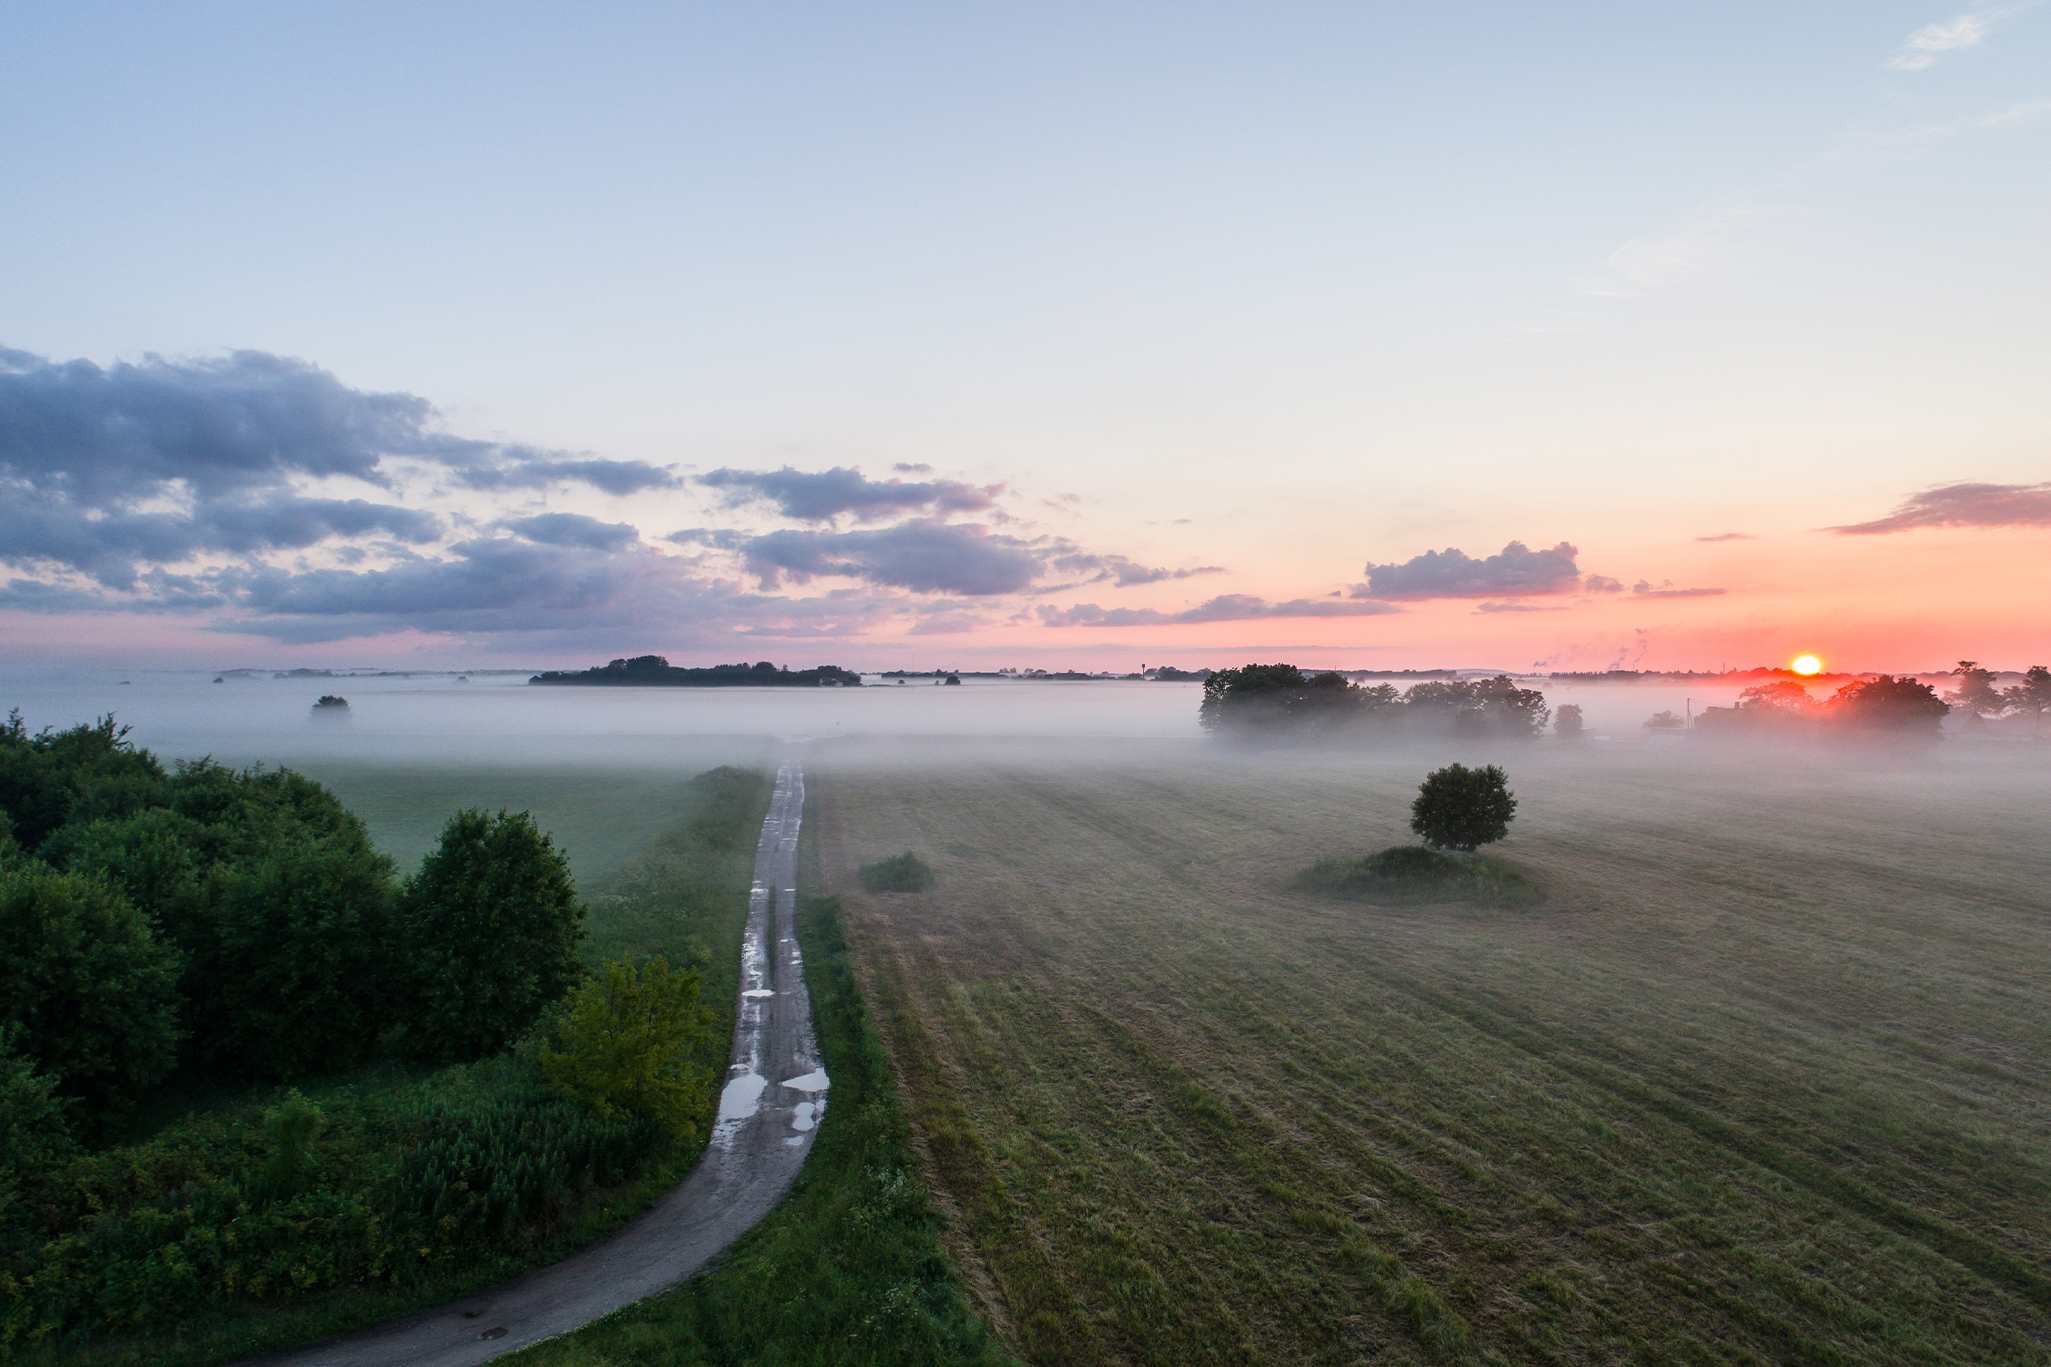 A country road with ground fog.